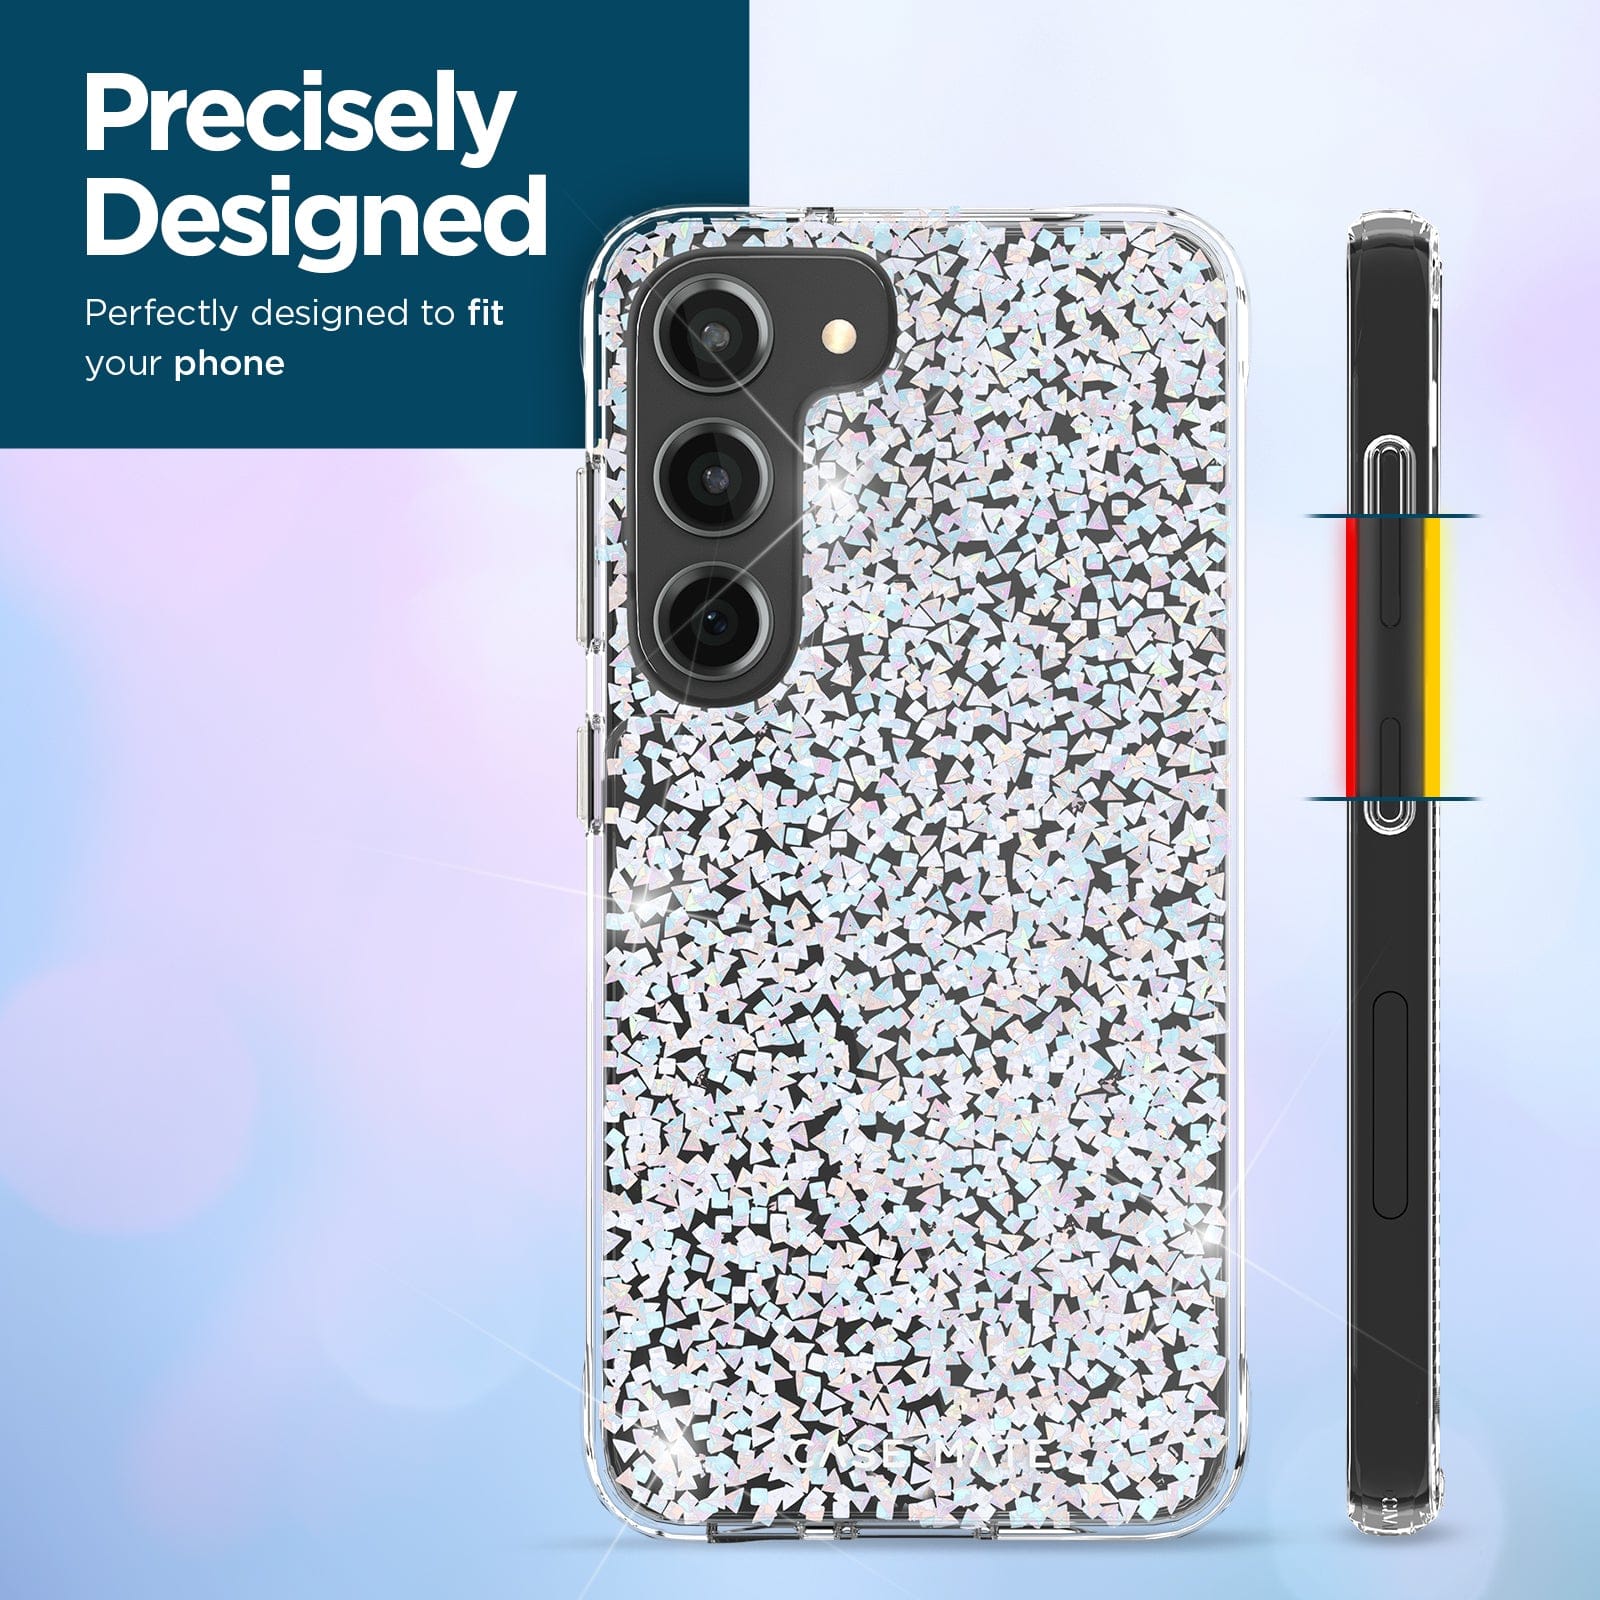 PRECISELY DESIGNED PERFECTLY DESIGNED TO FIT YOUR PHONE. 